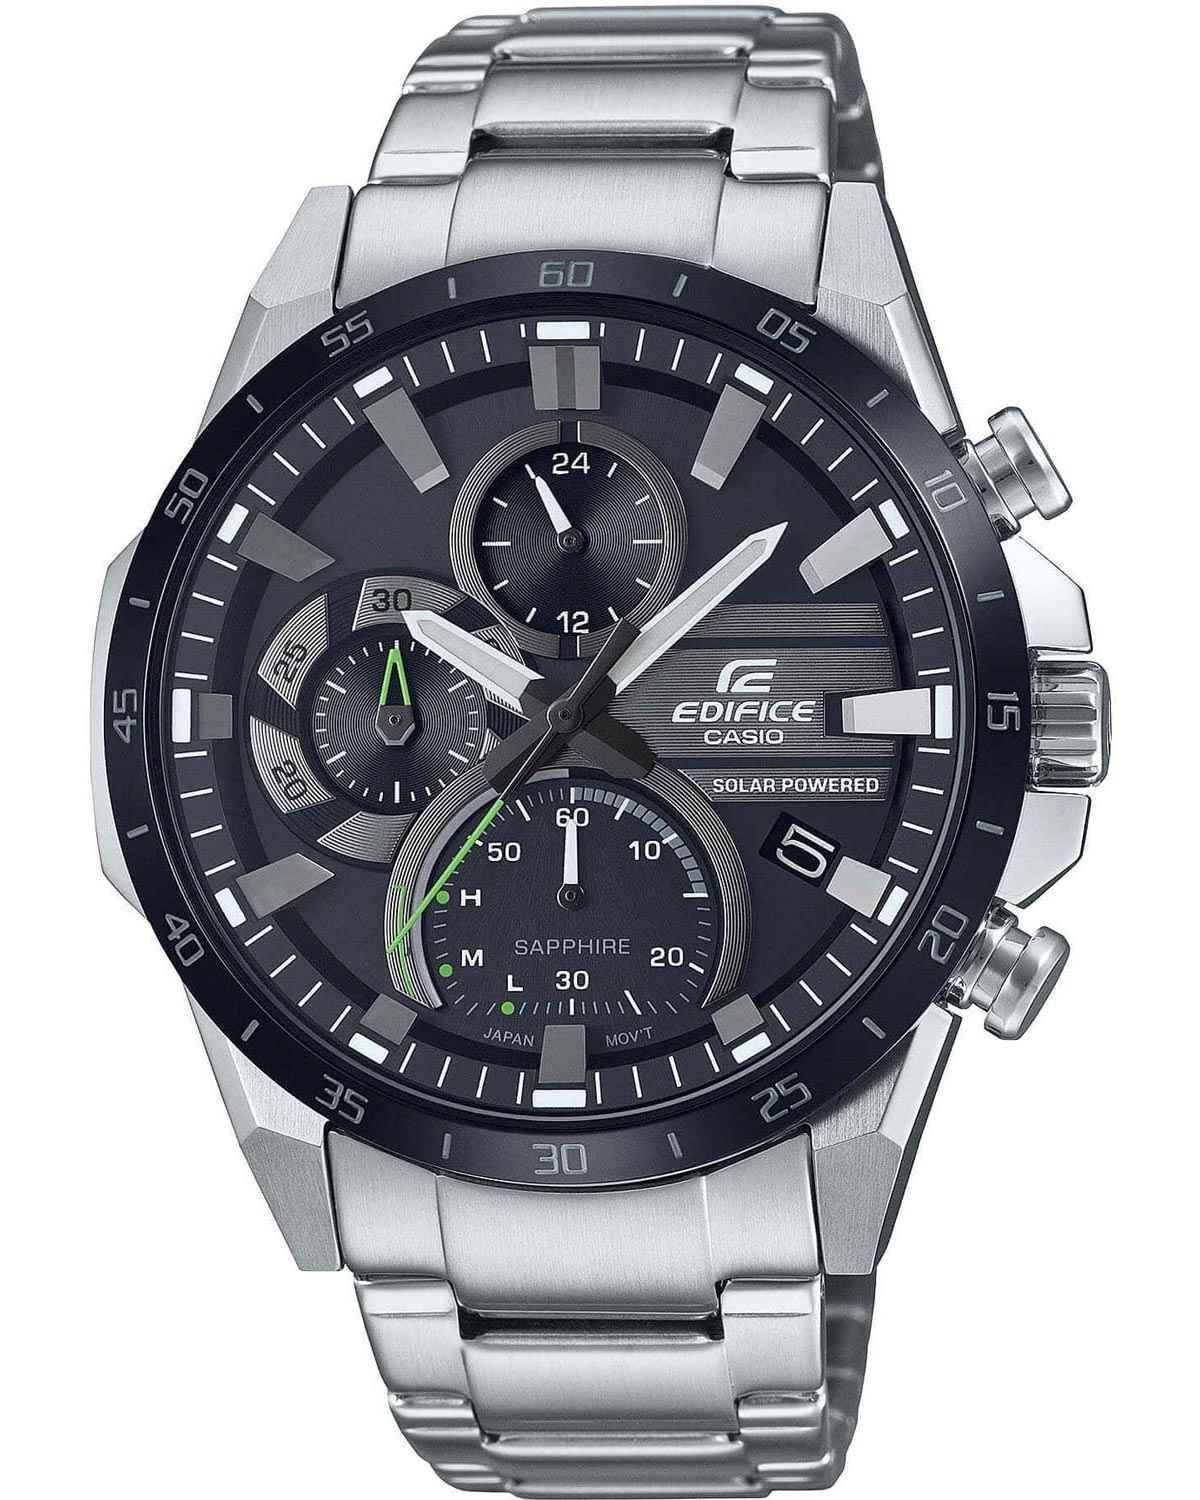 CASIO Edifice Solar Powered Premium Chronograph - EFS-S620DB-1AVUEF, Silver case with Stainless Steel Bracelet